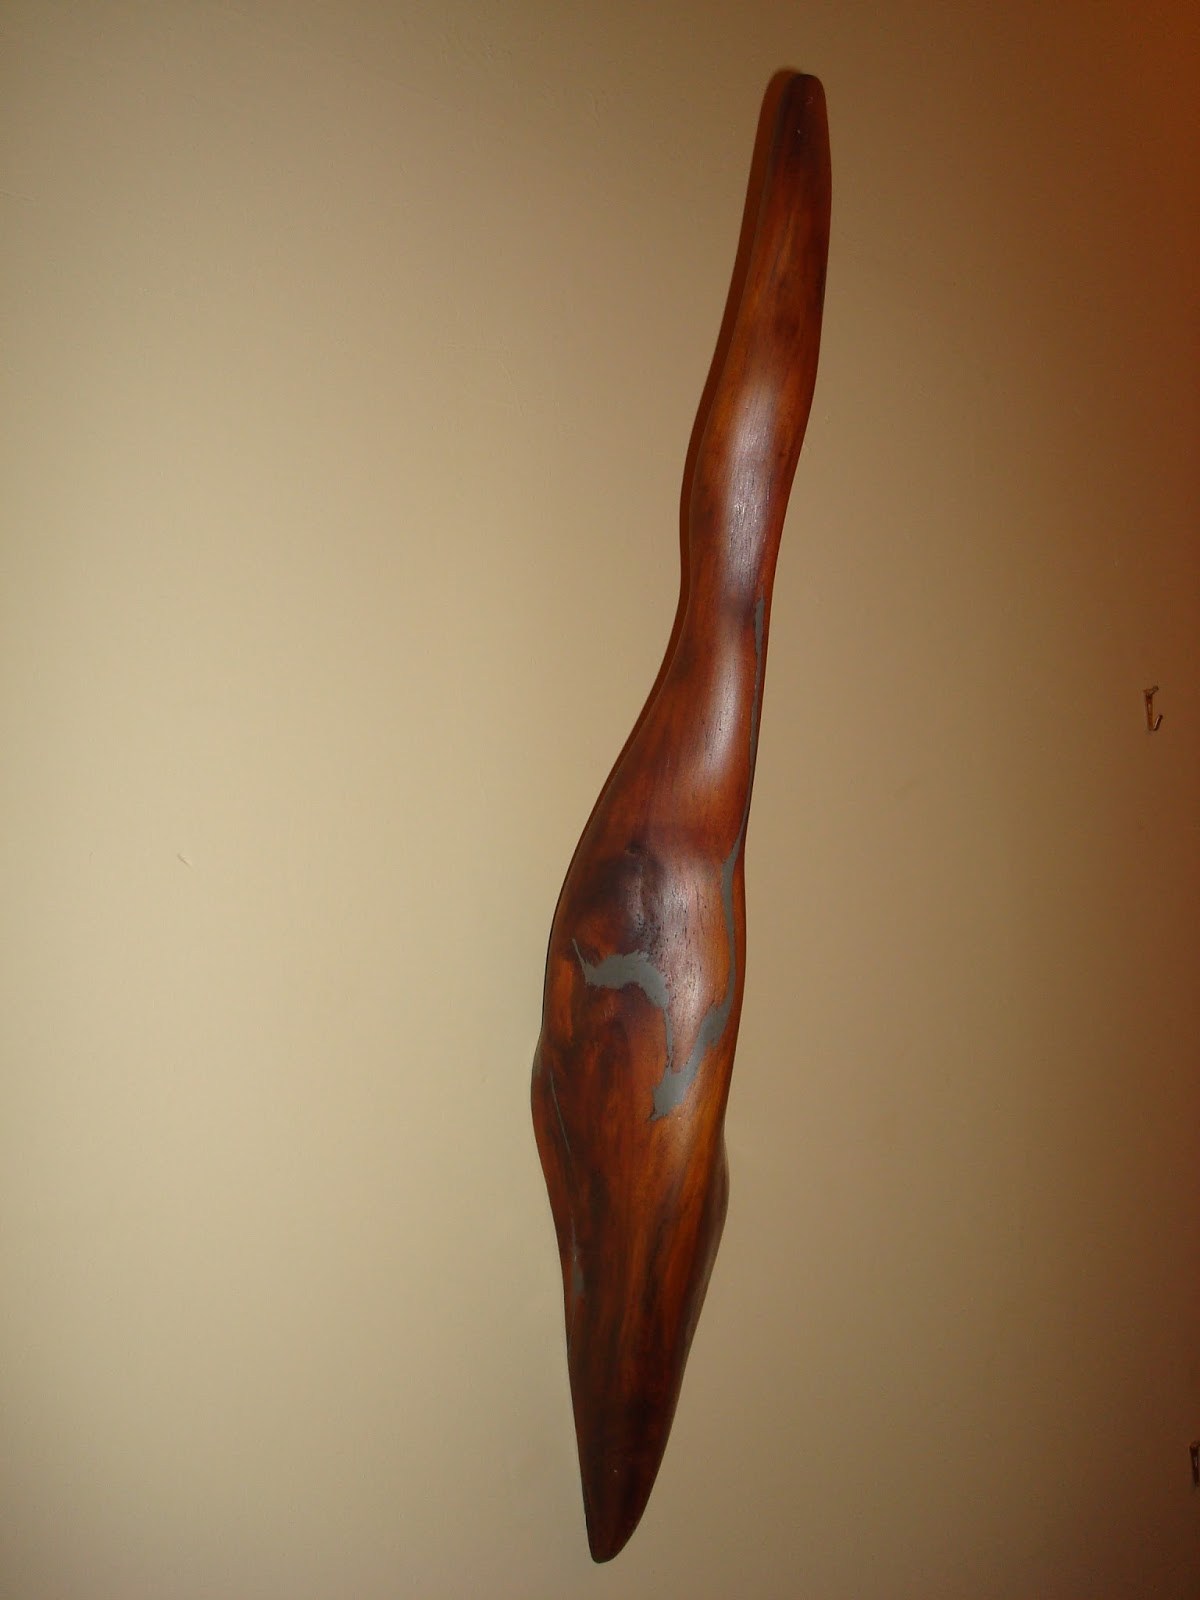 ... : LATE 1960'S TO EARLY 1970'S SOLID WOOD FREE FORM WALL SCULPTURE